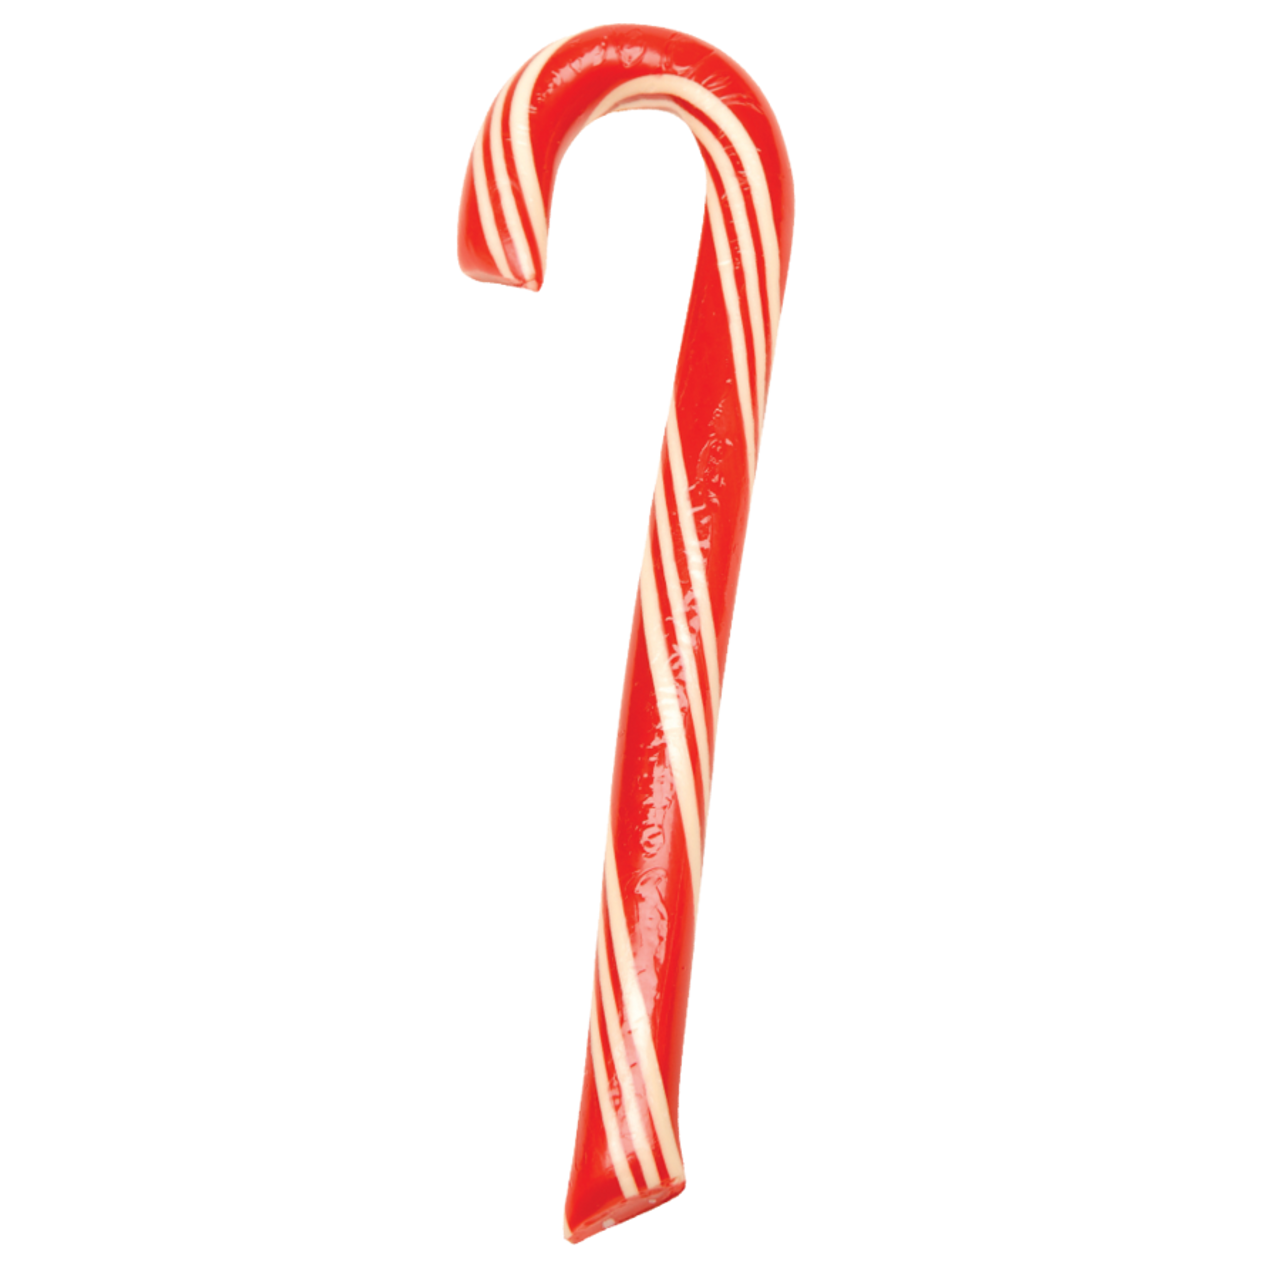 Hammonds Peppermint Candy Cane Filled With Chocolate Cf02848 7074